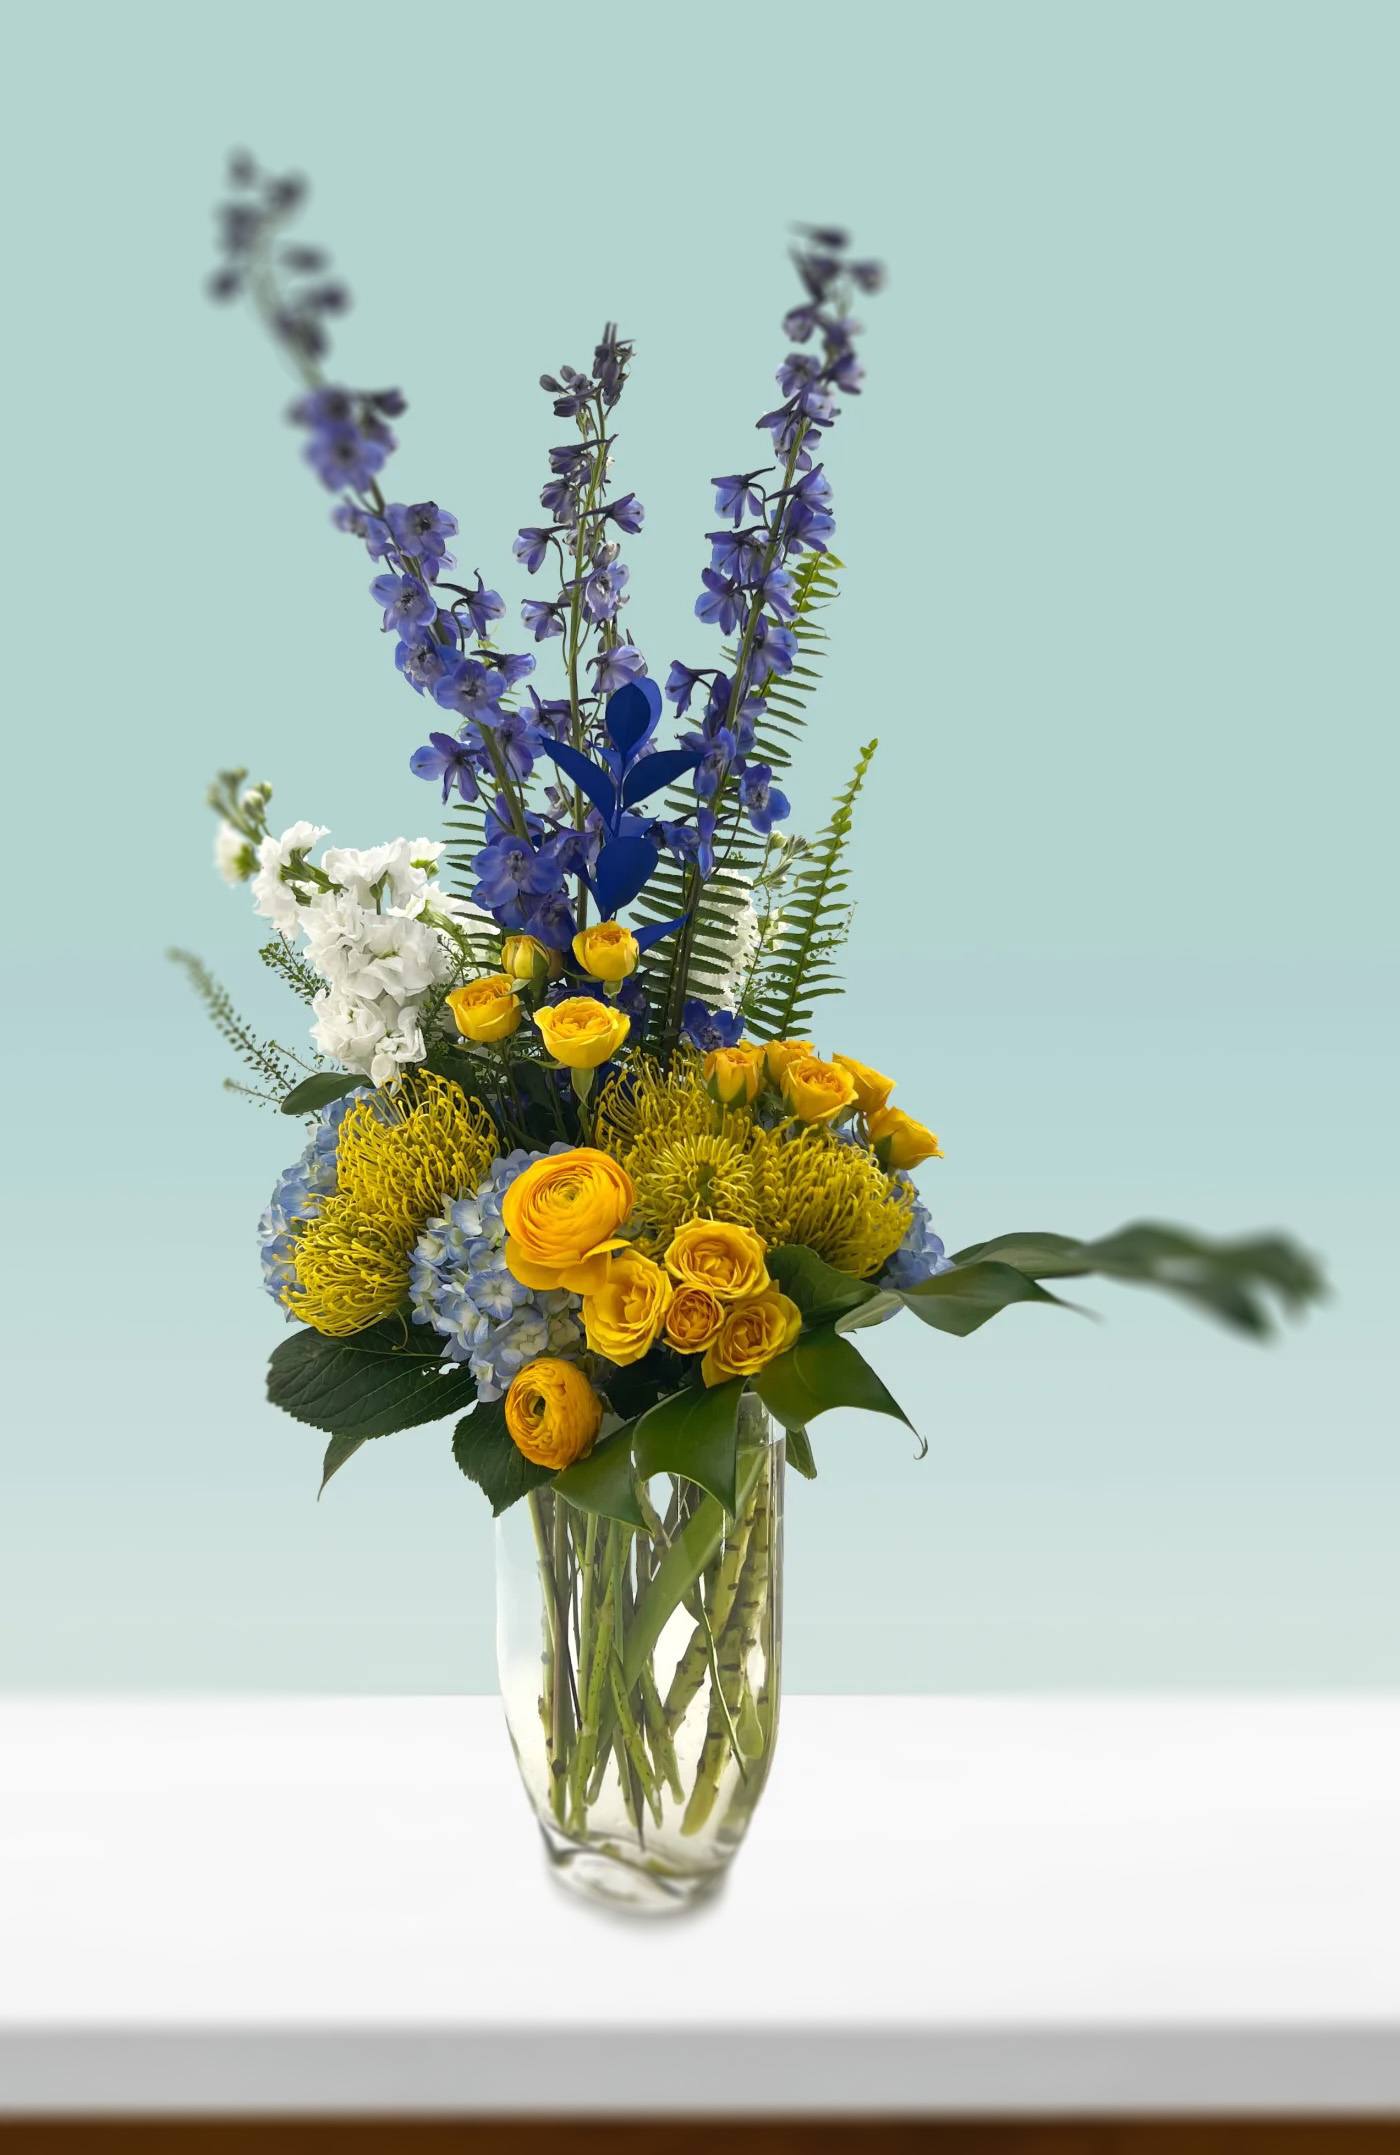 Limitless Joy - Boundless joy to be found with this bold combination of yellows and blues. Flowers include protea, spray roses, hydrangea, and delphinium.